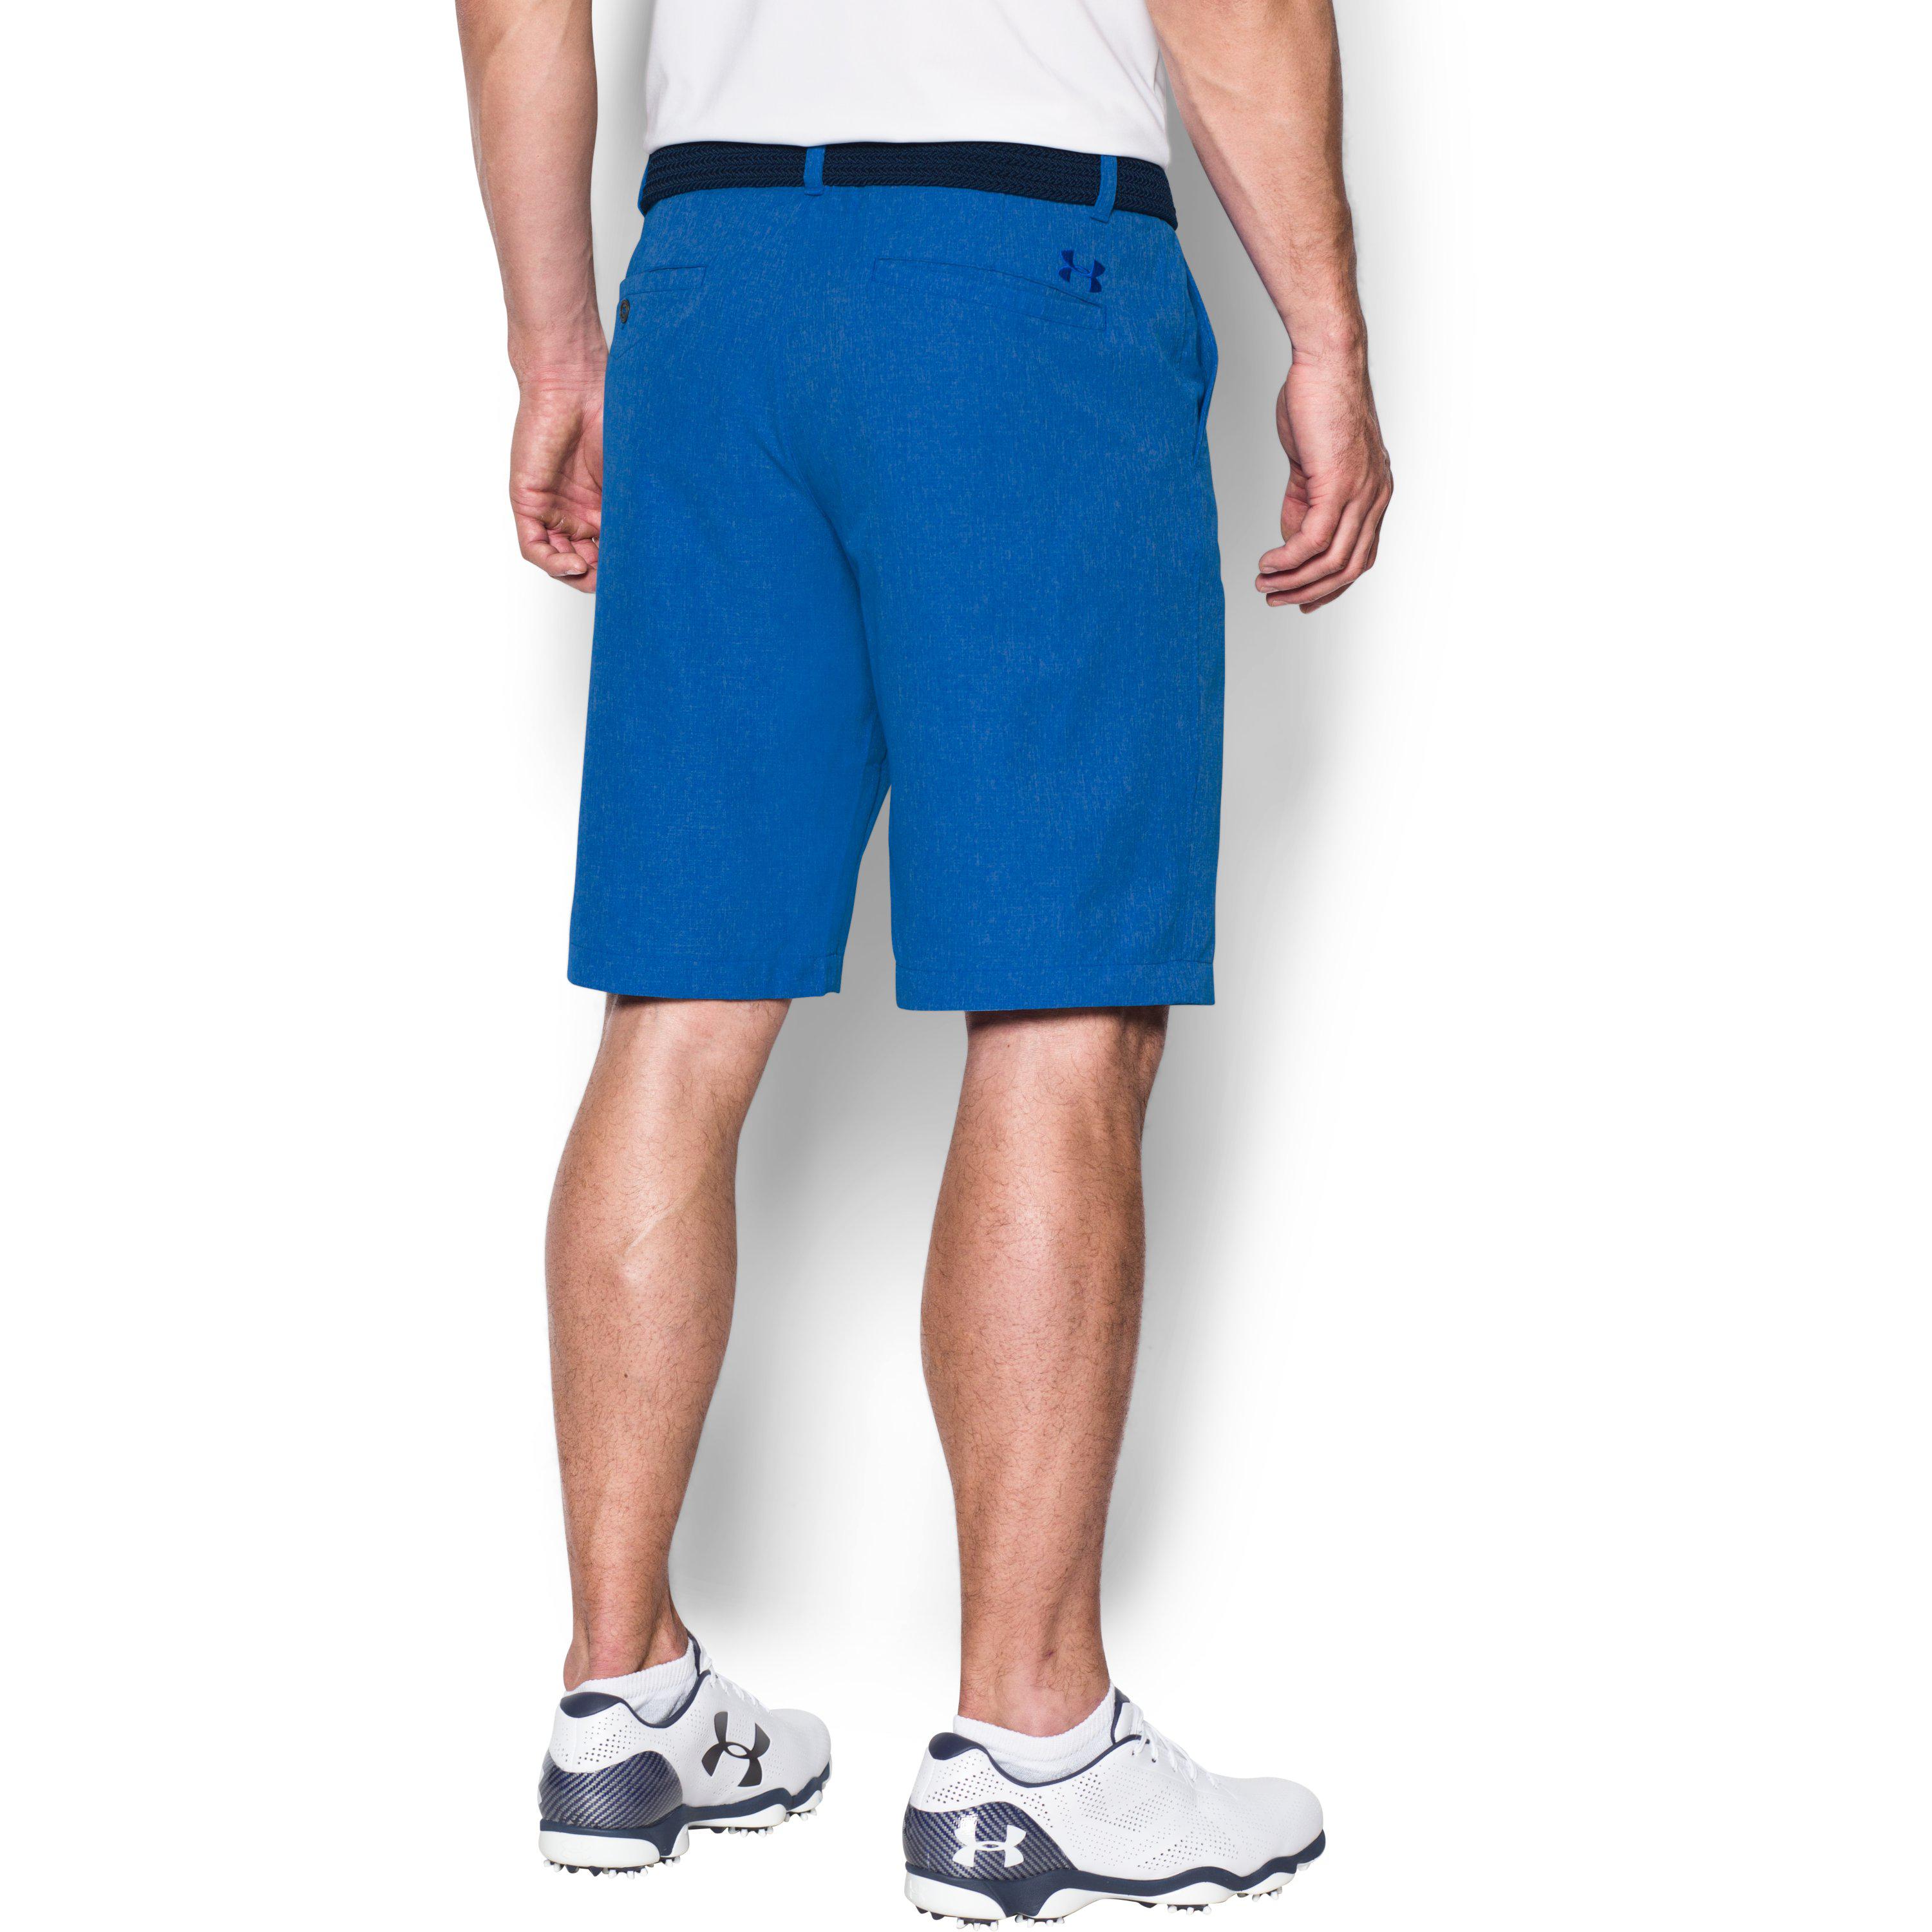 Under Armour Men's Ua Match Play Vented Shorts in Blue for Men - Lyst